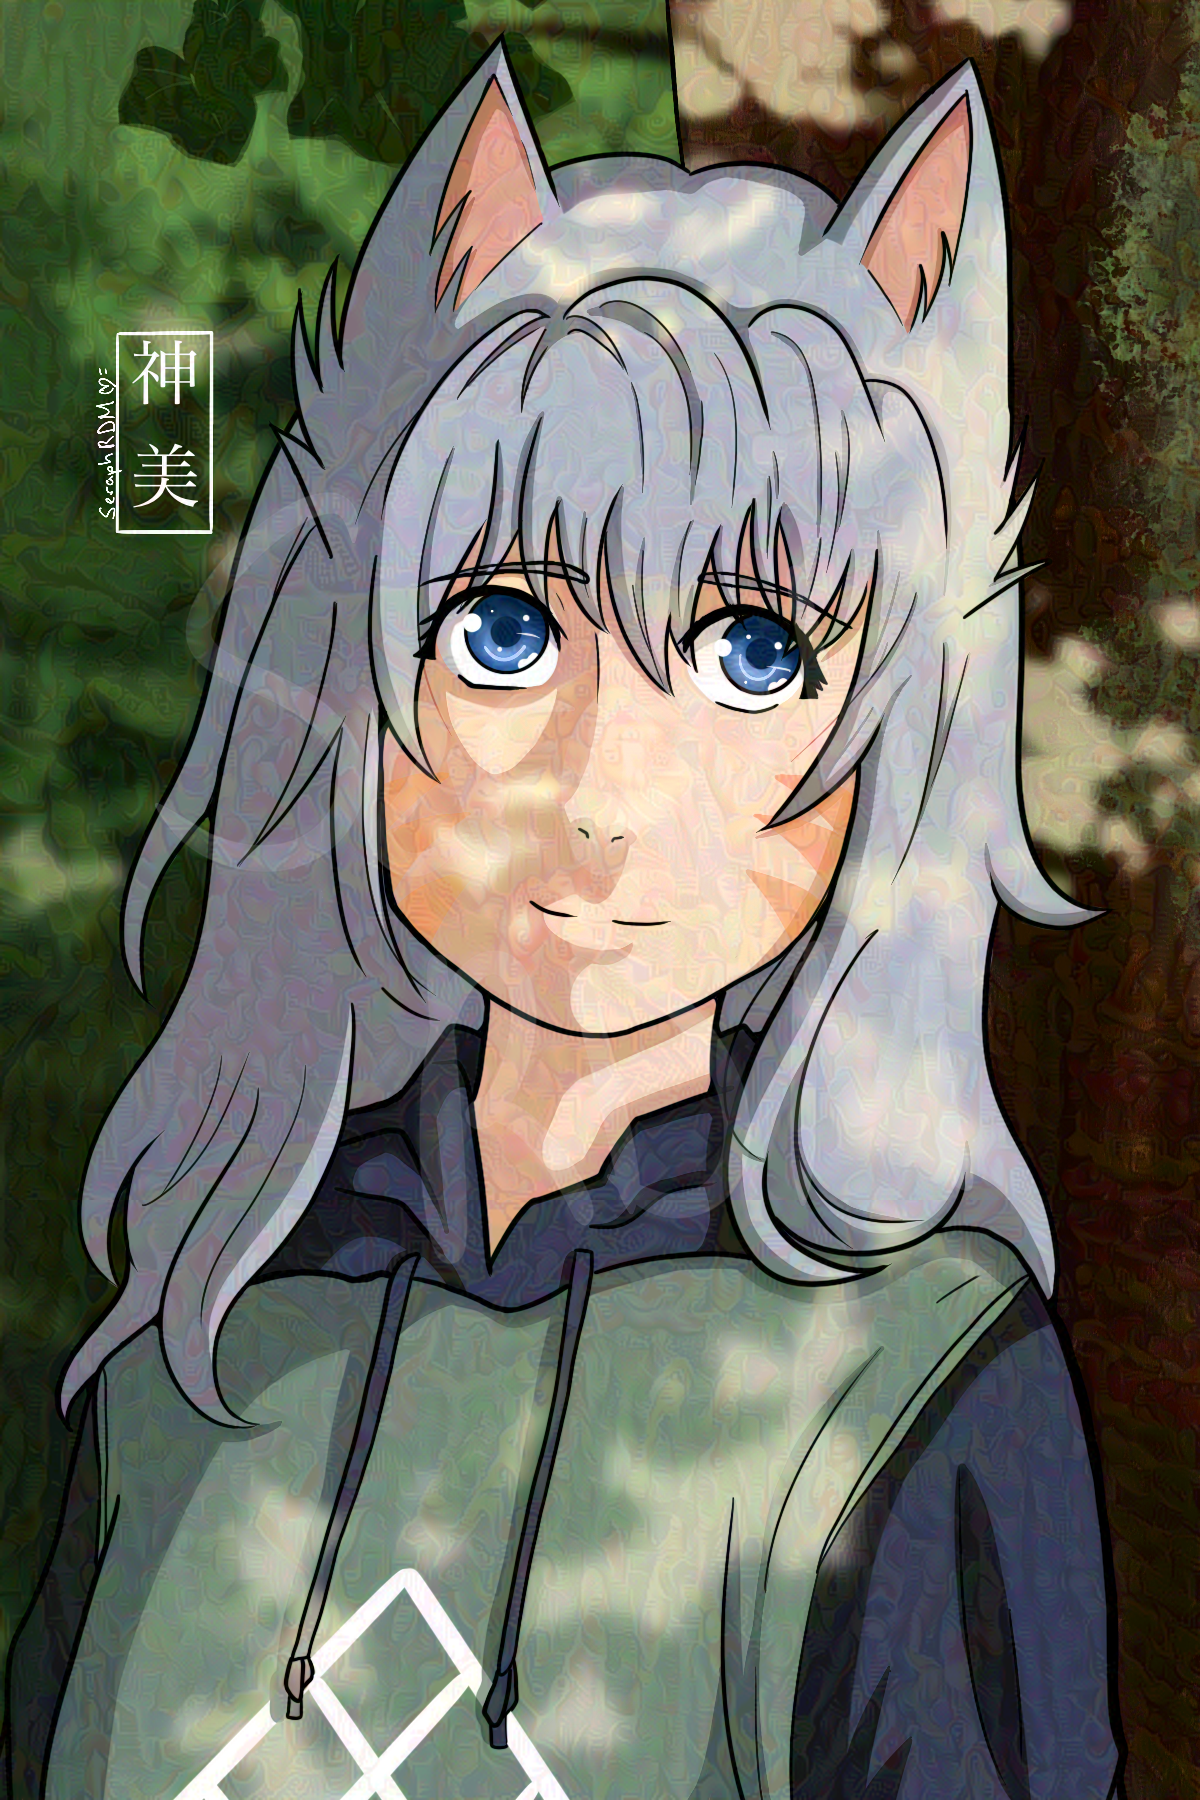 A portrait of Inarora Beservera with her back against a tree in a sun-dappled forest. She has long, silver hair with a pair of cat ears perched atop her head, and her blue eyes are gazing to the side as she gives a wry smile. 